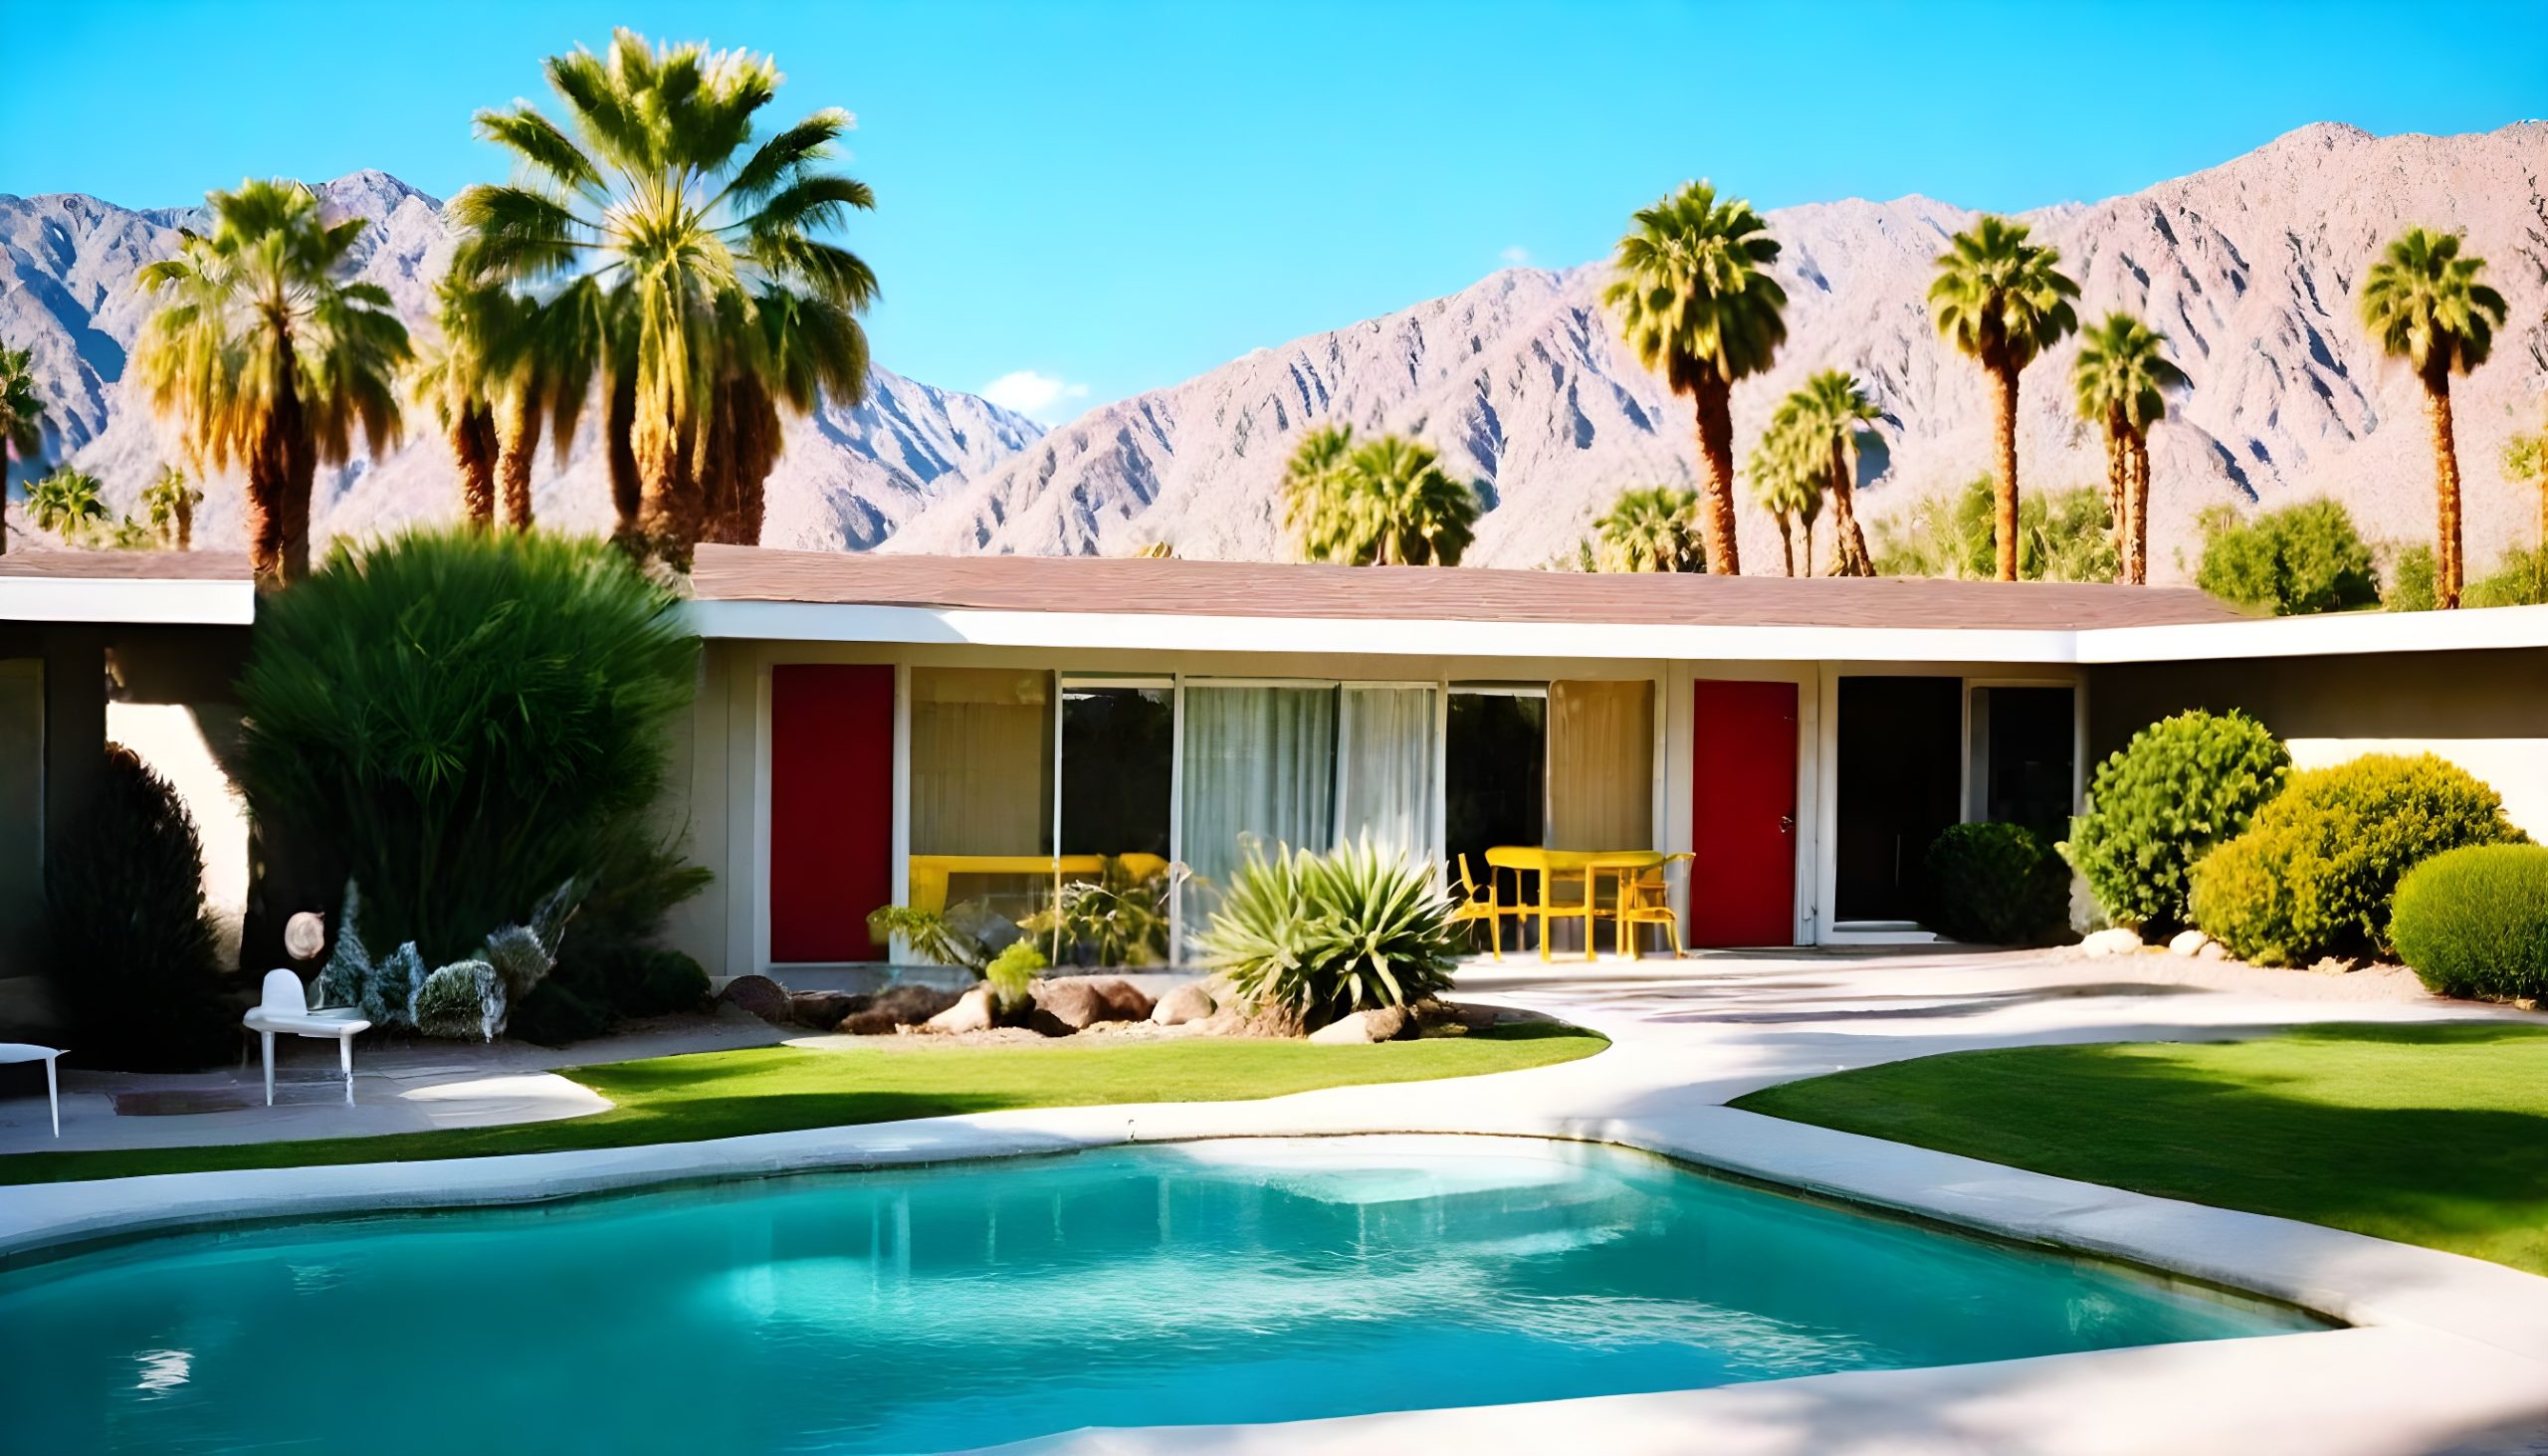 Dive into LGBTQ+ Palm Springs with our guide. Discover the vibrant community, events, and hotspots that make it a welcoming oasis for all.